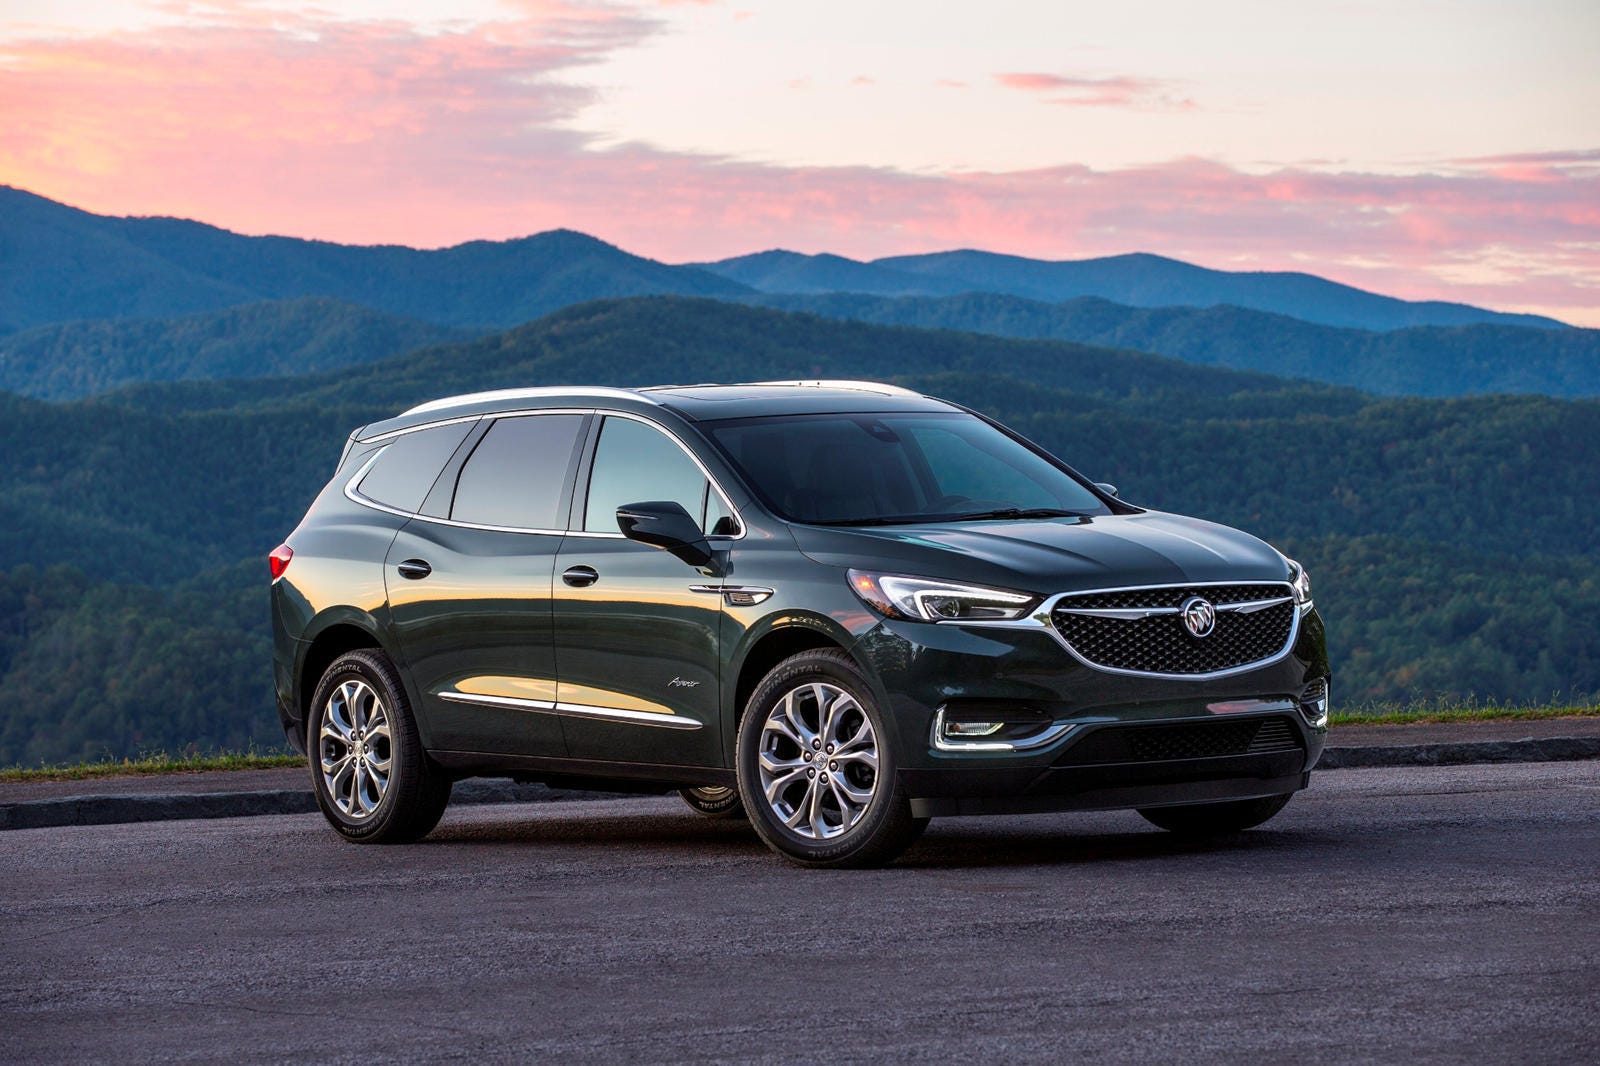 Test Drive: 2020 Buick Enclave SUV